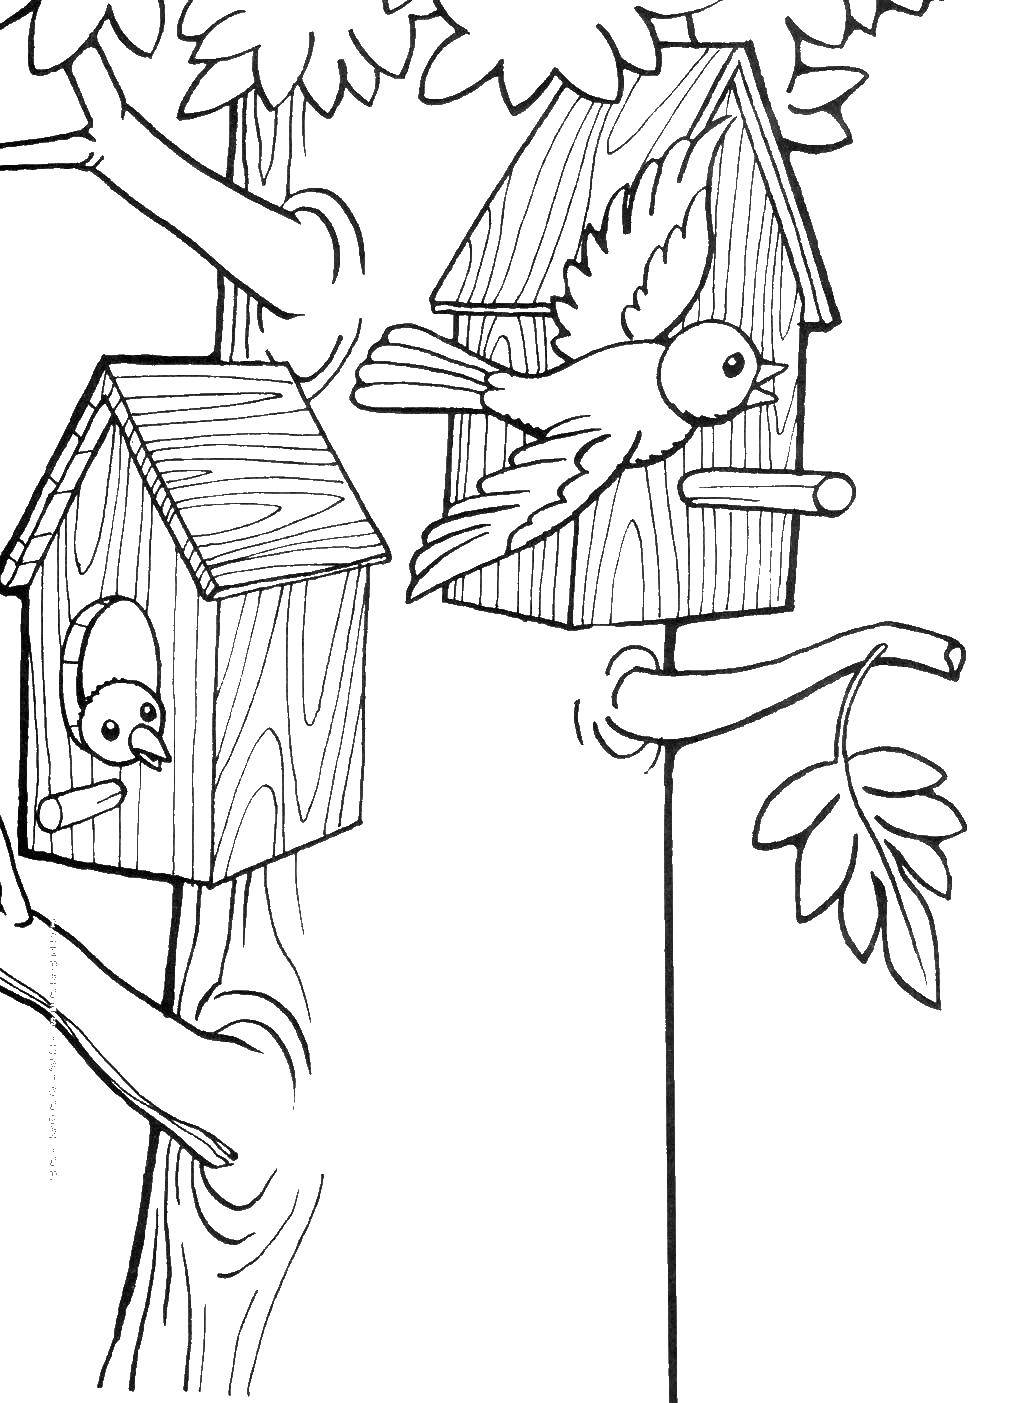 Coloring Birds in the birdhouses. Category birds. Tags:  birds, birds, tree, birdhouses.